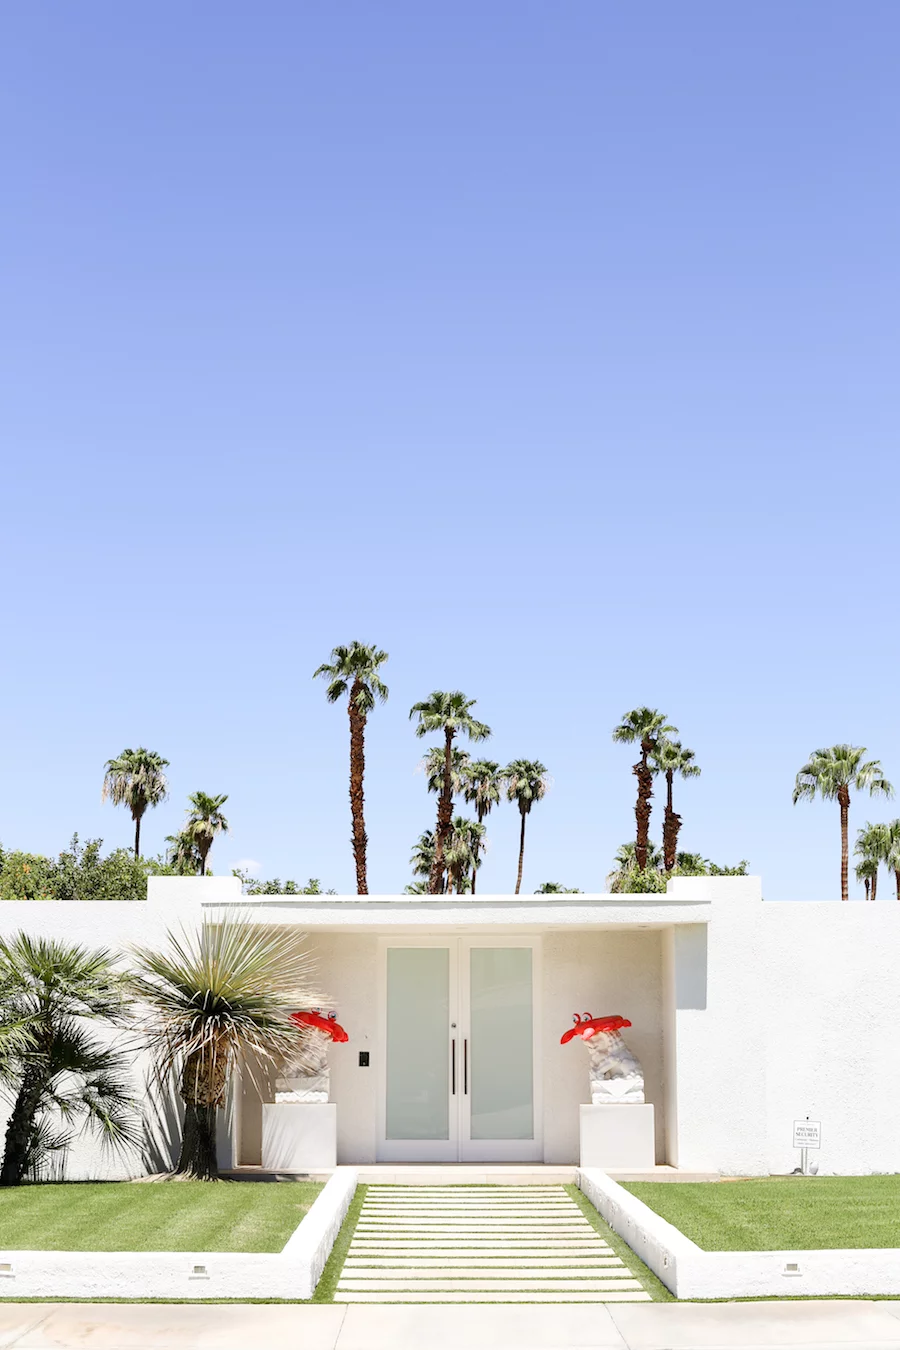 Take a Palm Springs Door Tour to see all the bright & colorful midcentury modern front doors, Instagram Photos, Insta-worthy, Driving Tour, Architecture Tour, Weekend Trip, Palm Springs Guide, Travel Guide, What to do in Palm Springs, Walking Door, Photo Tour, That Pink Door Address, Party Lions, Free Printable Map, Salty Canary 